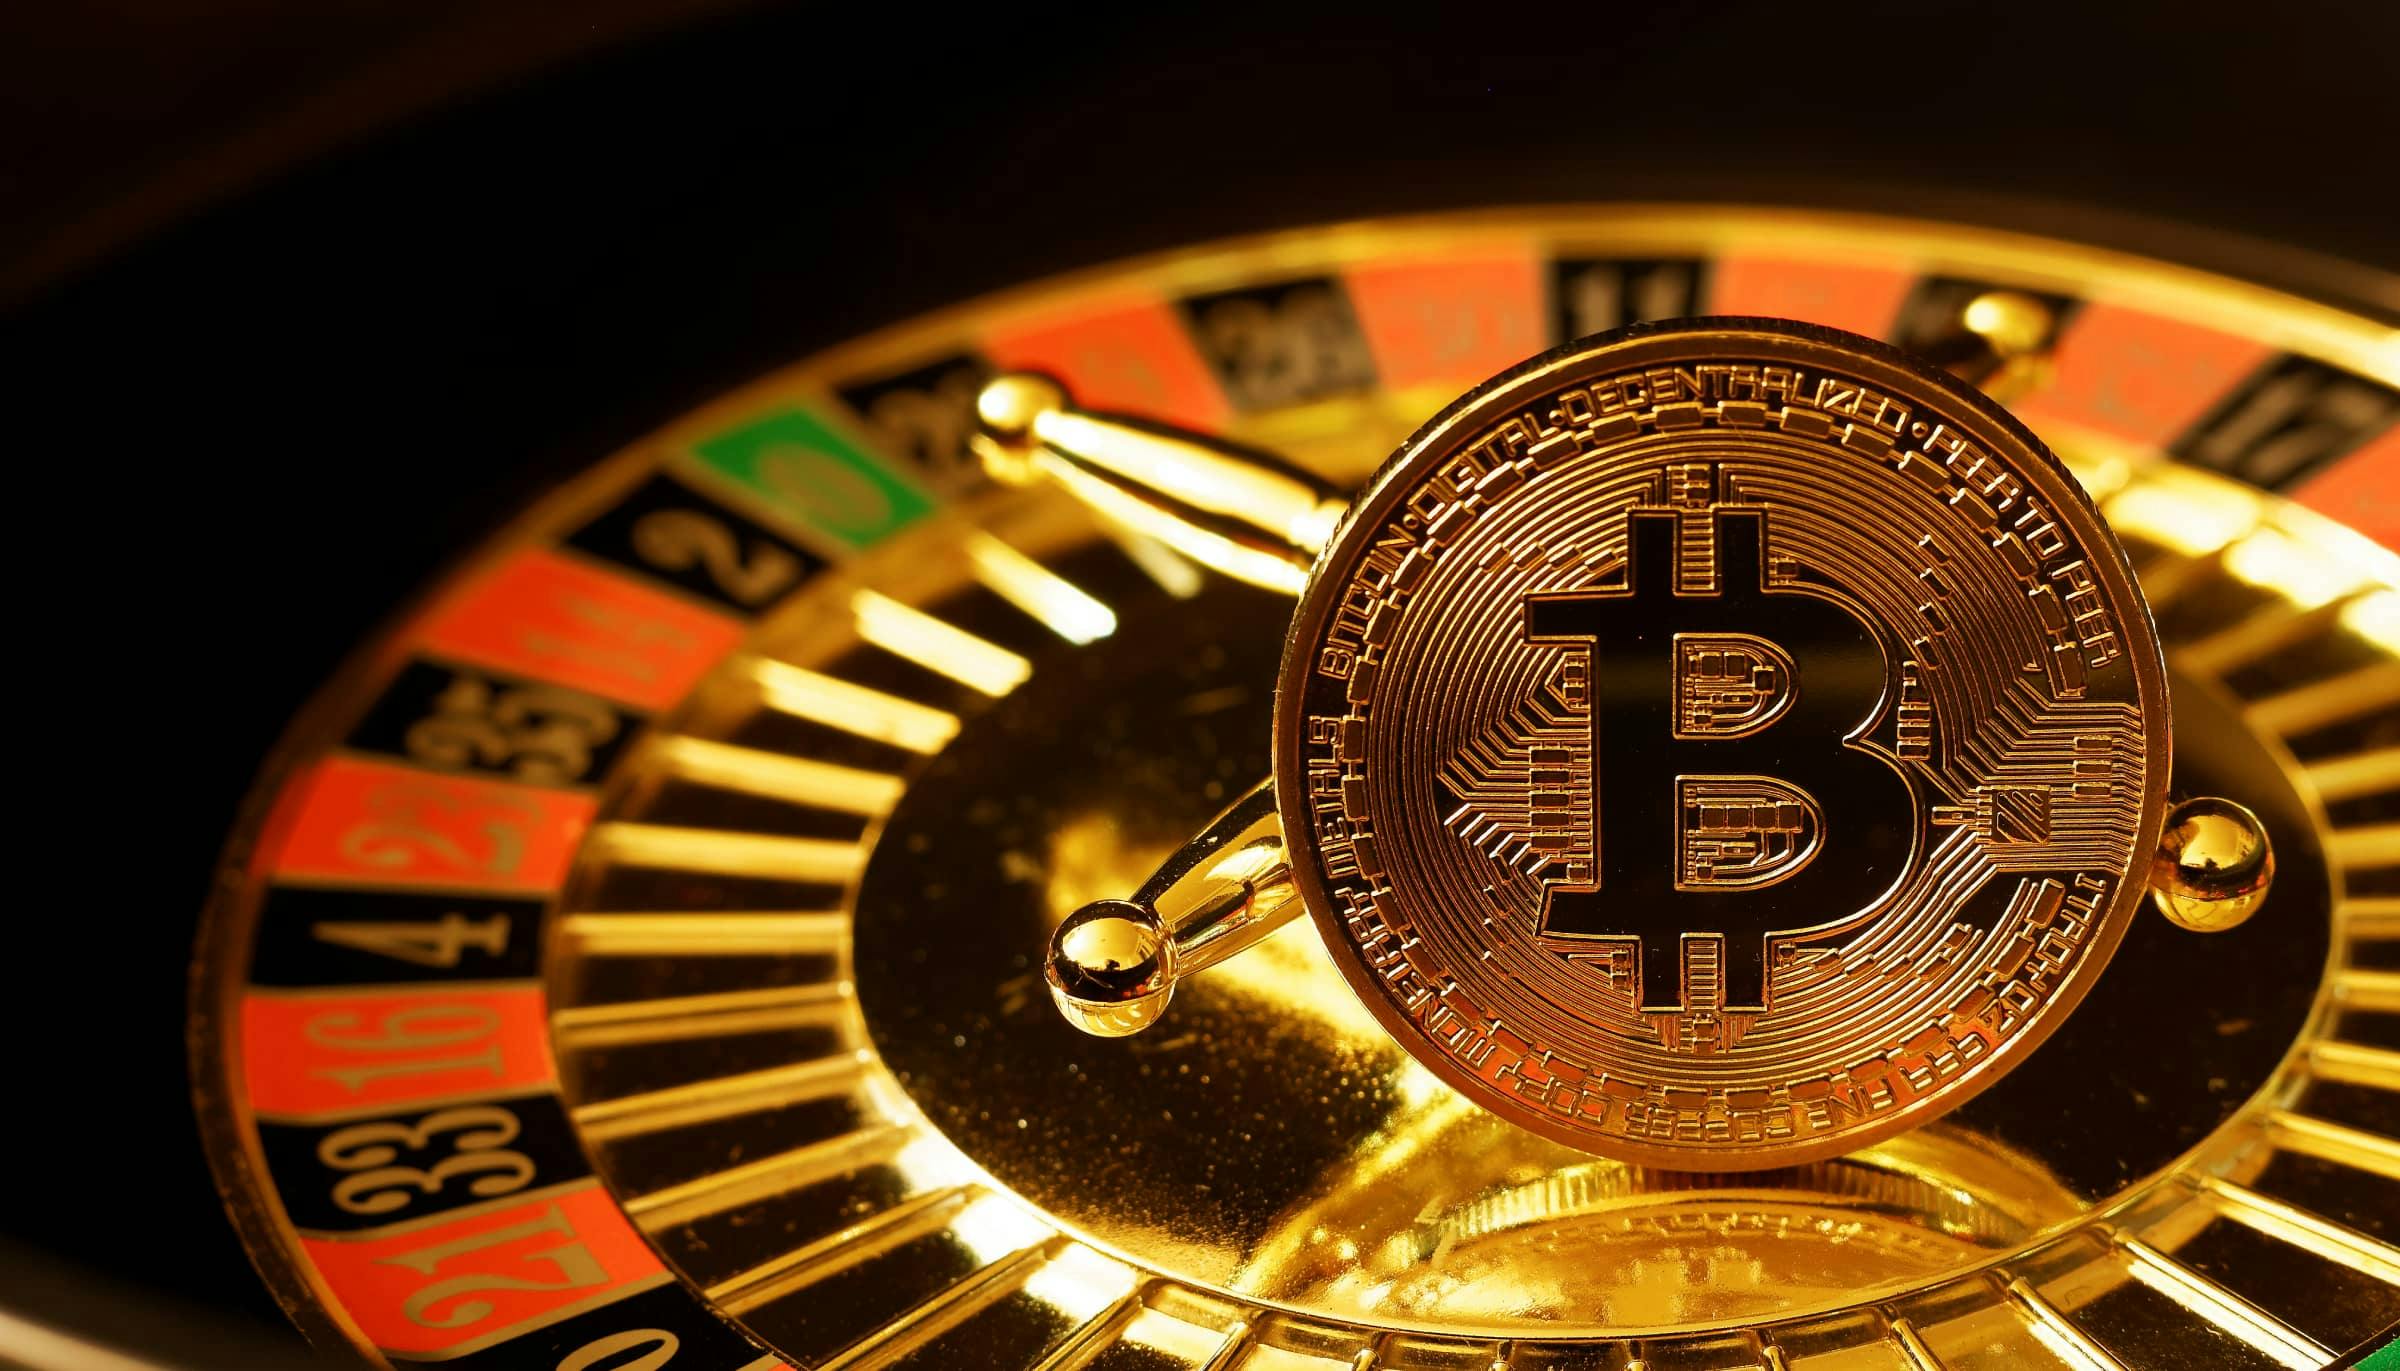 Place smarter bets using the best Bitcoin roulette strategies